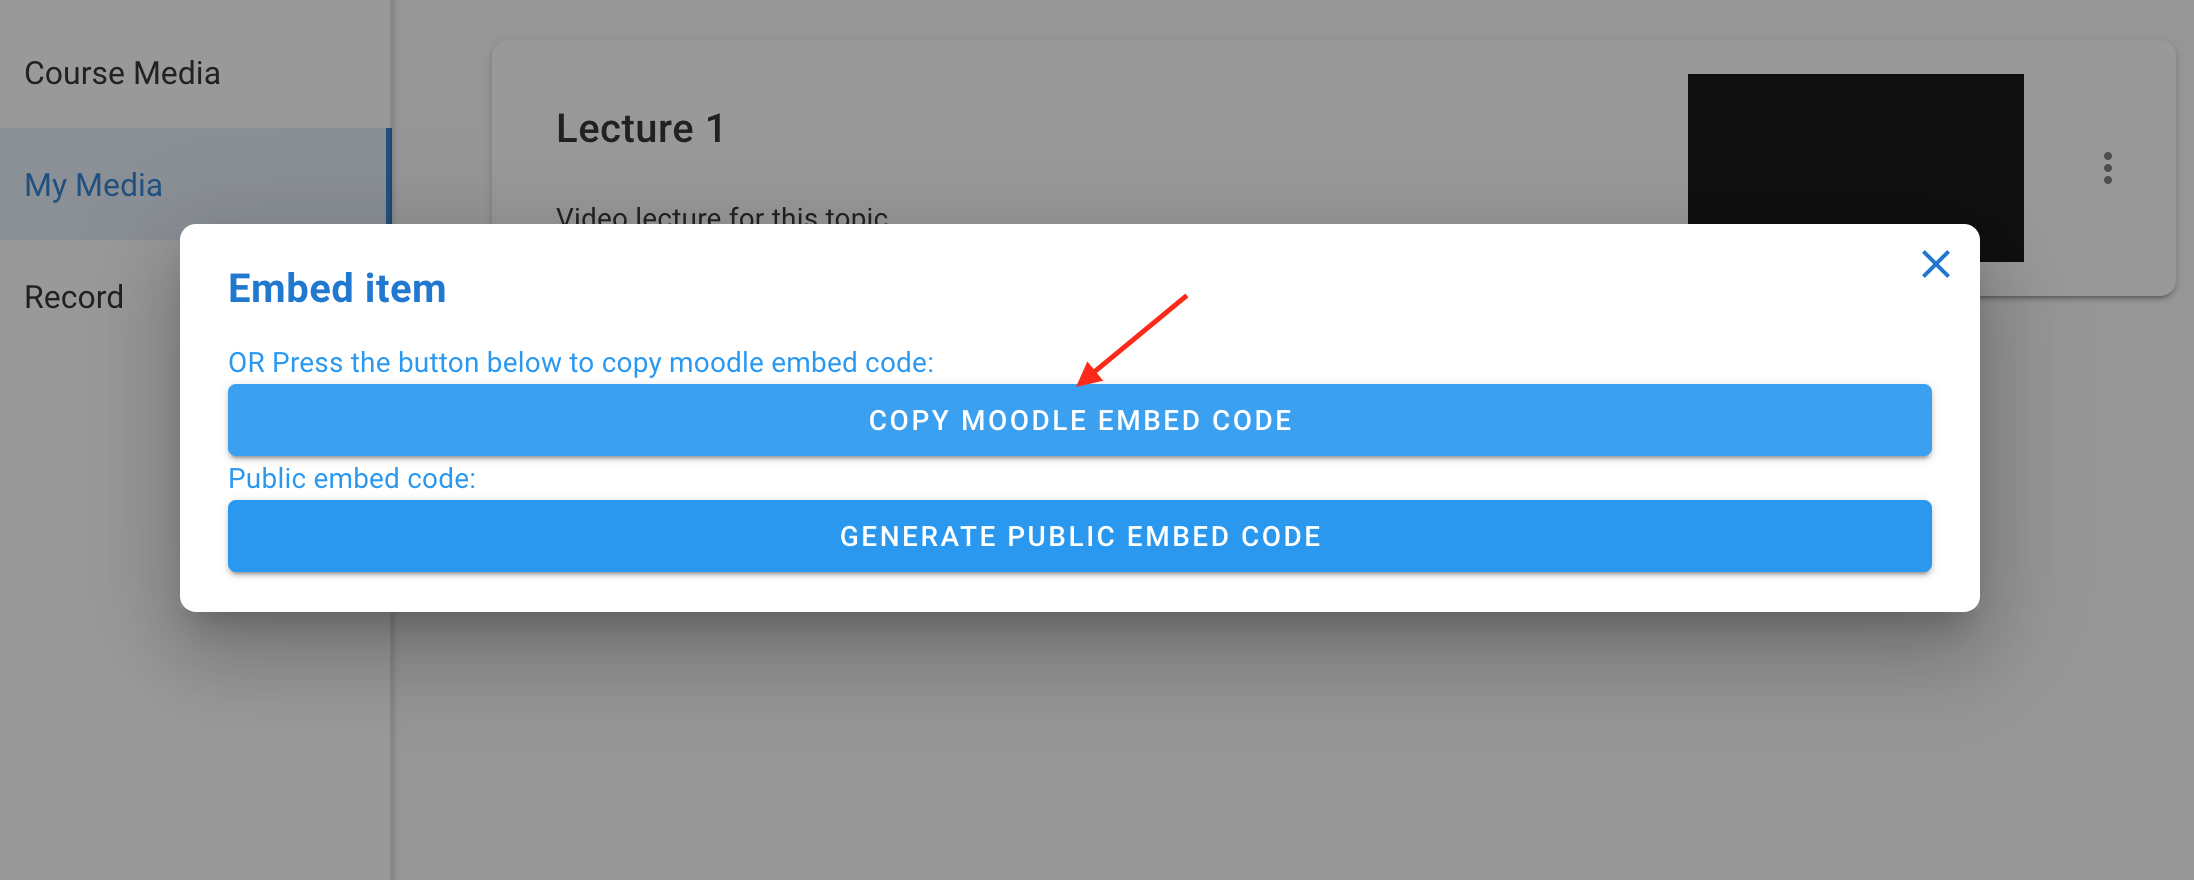 The Copy Moodle Embed Code button